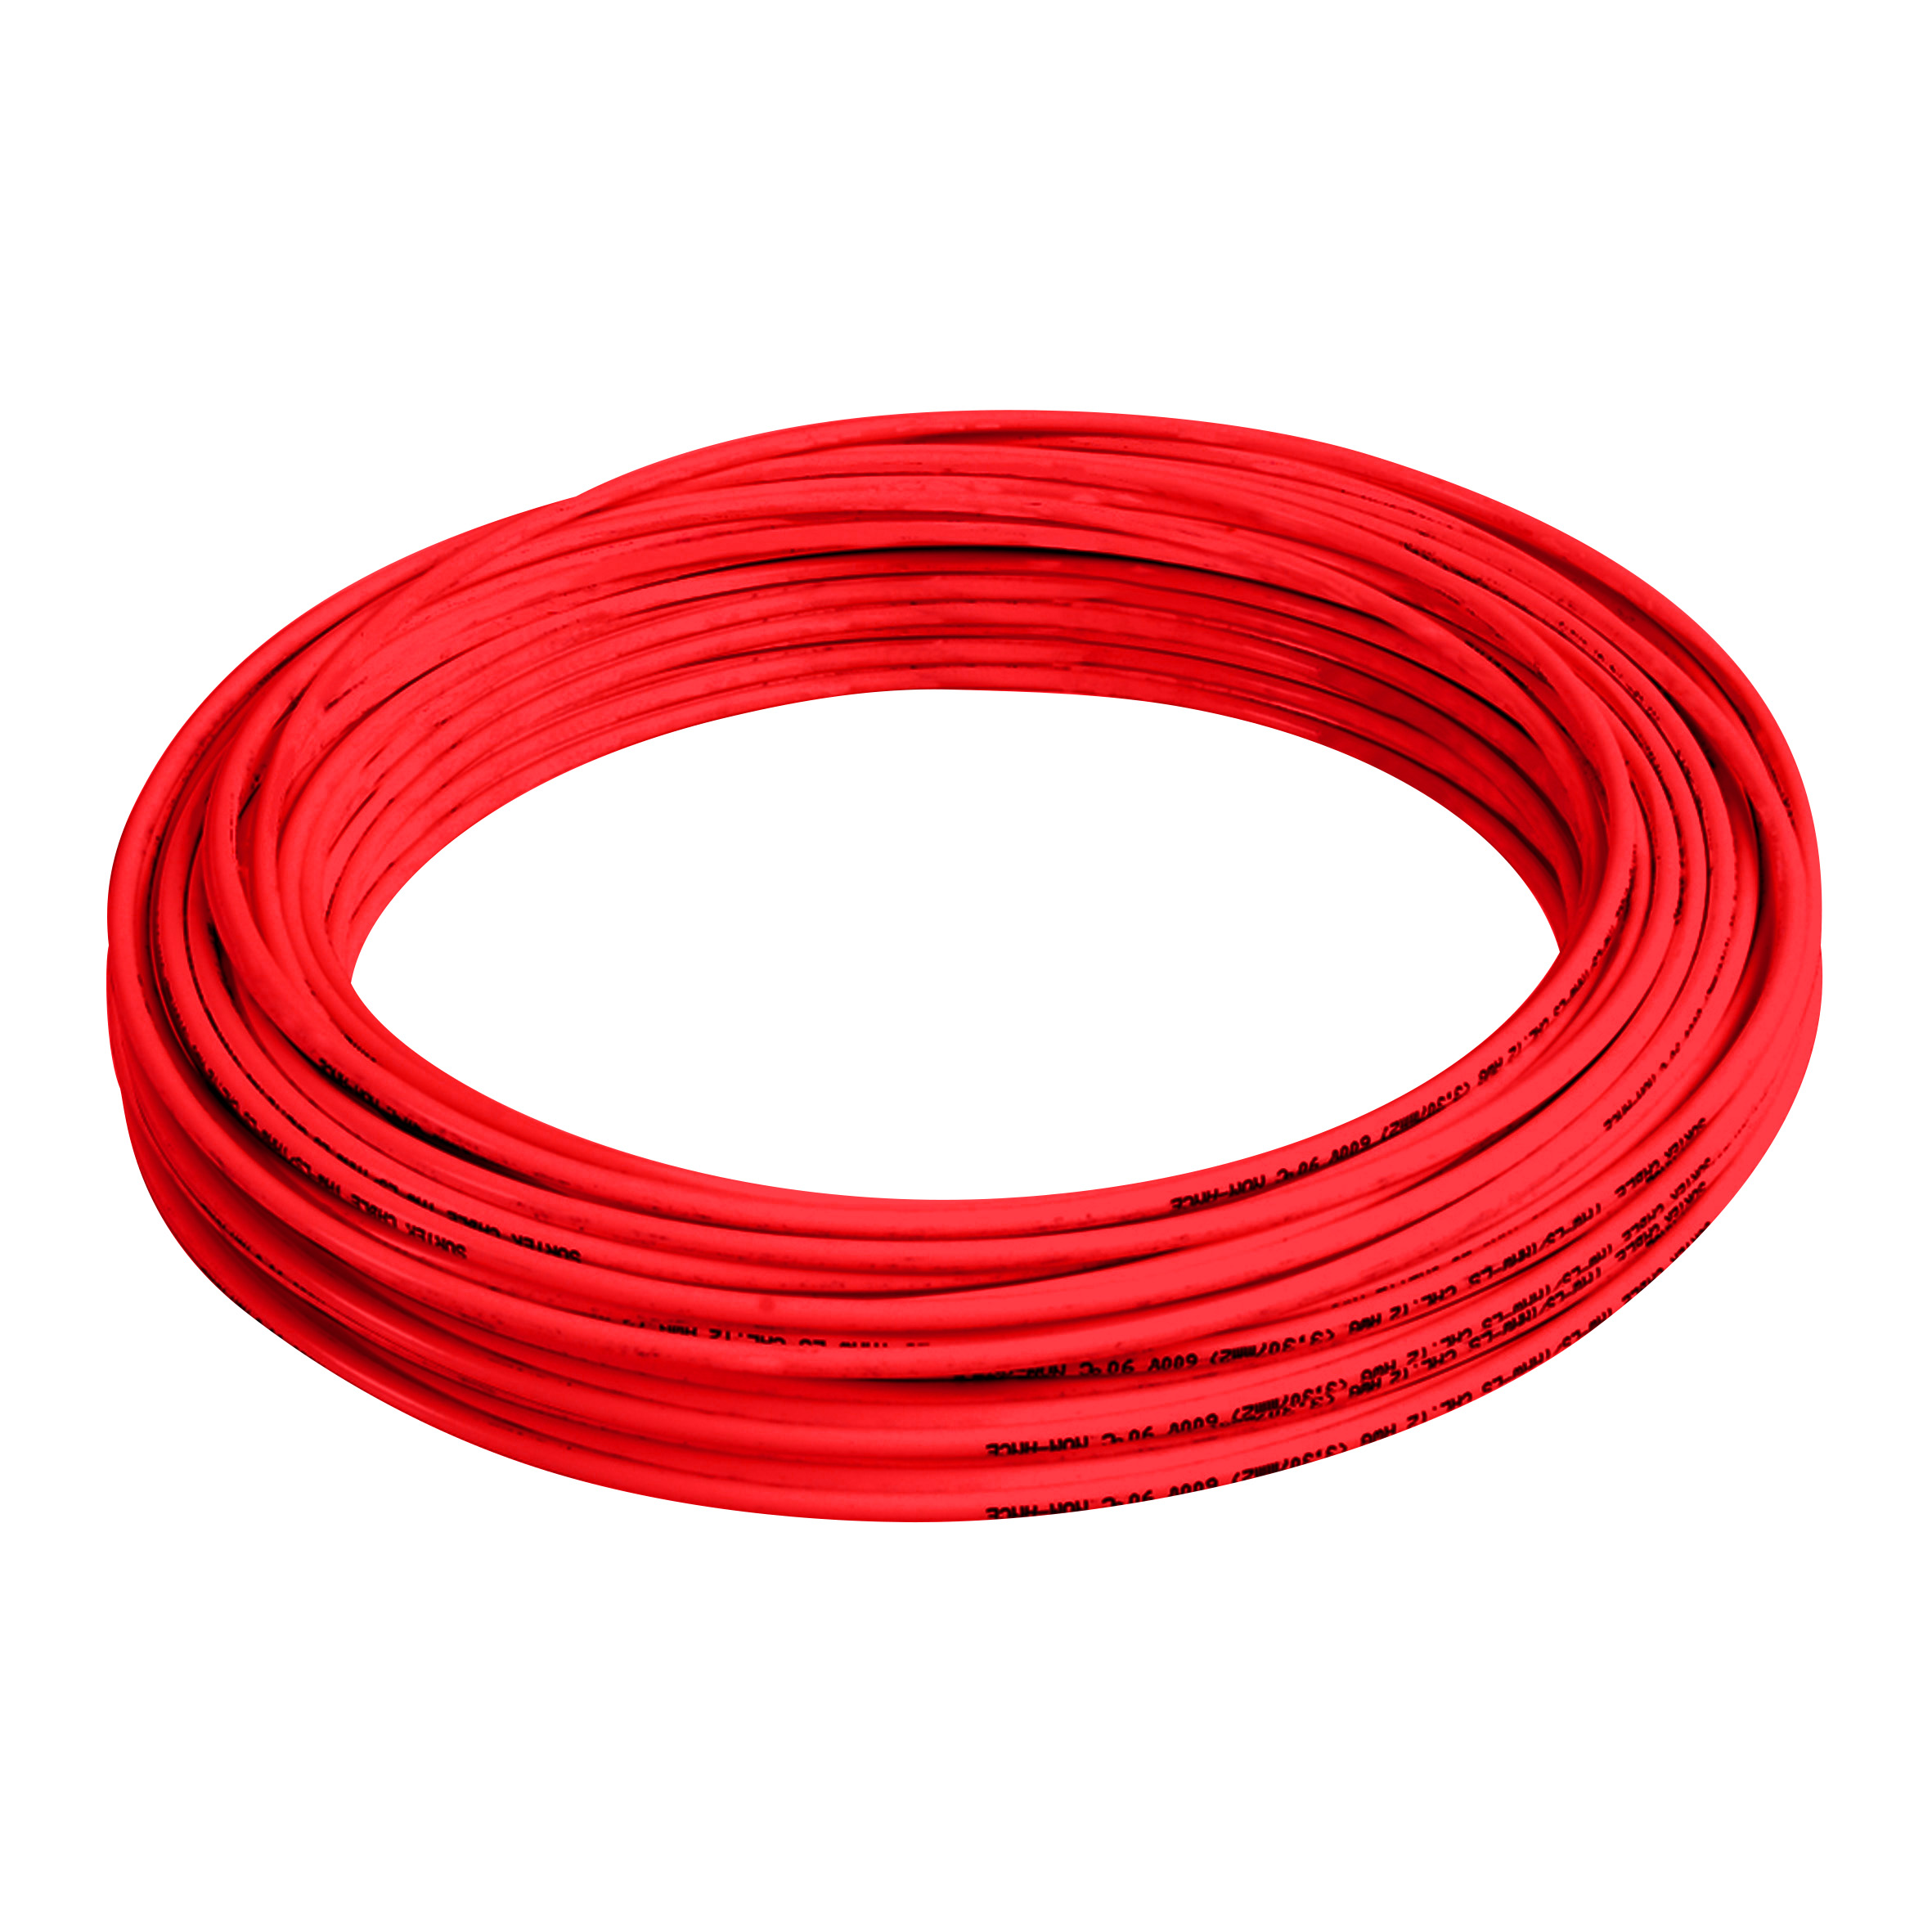 Cable eléctrico tipo THW-LS / THHW-LS Cal.8 100m rojo